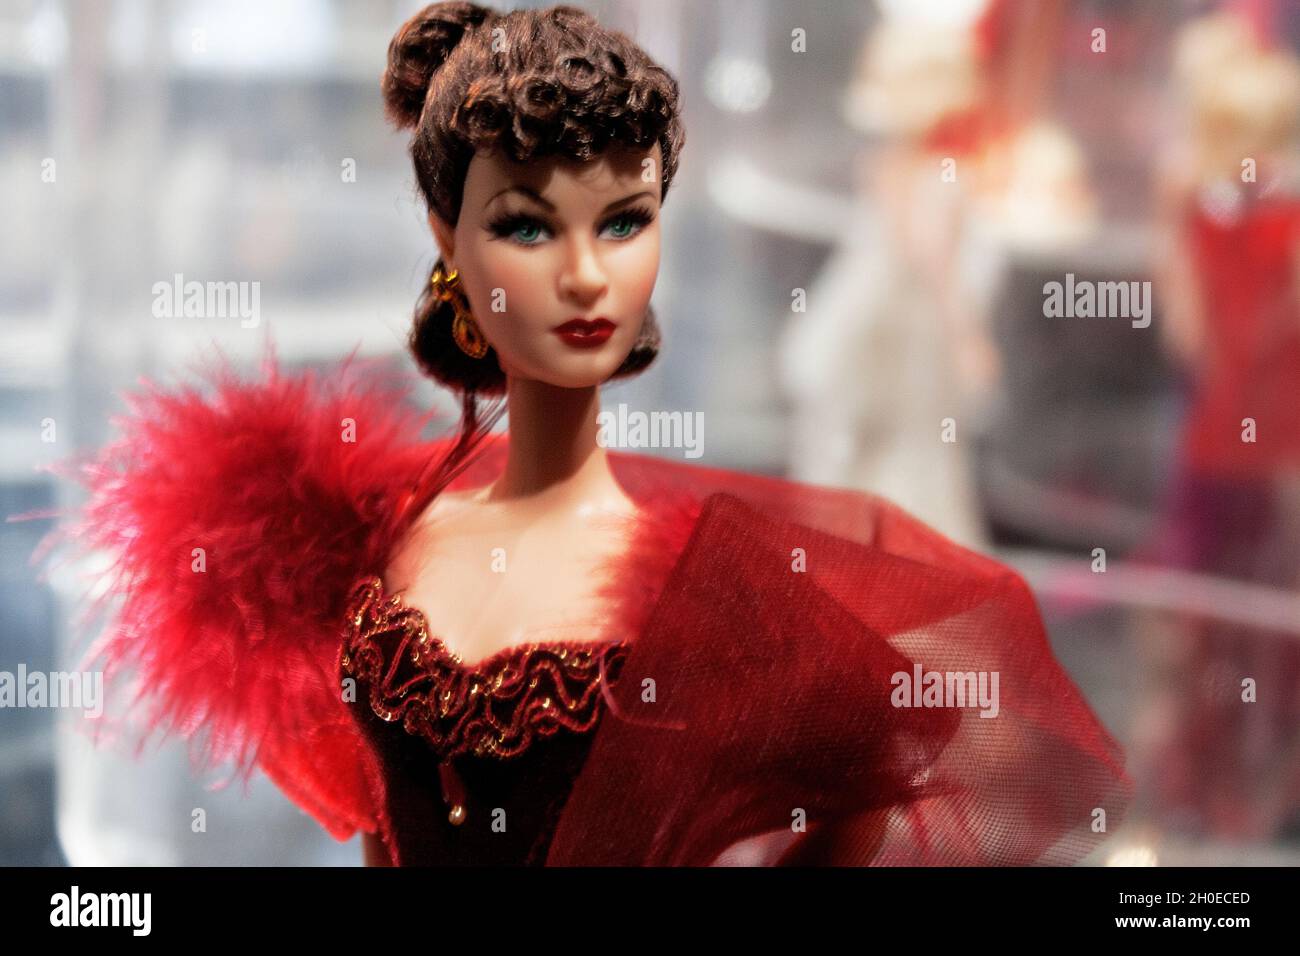 Scarlett O'Hara Barbie, Barbie The Icon exposition at Mudec museum in Milan, Italy Stock Photo